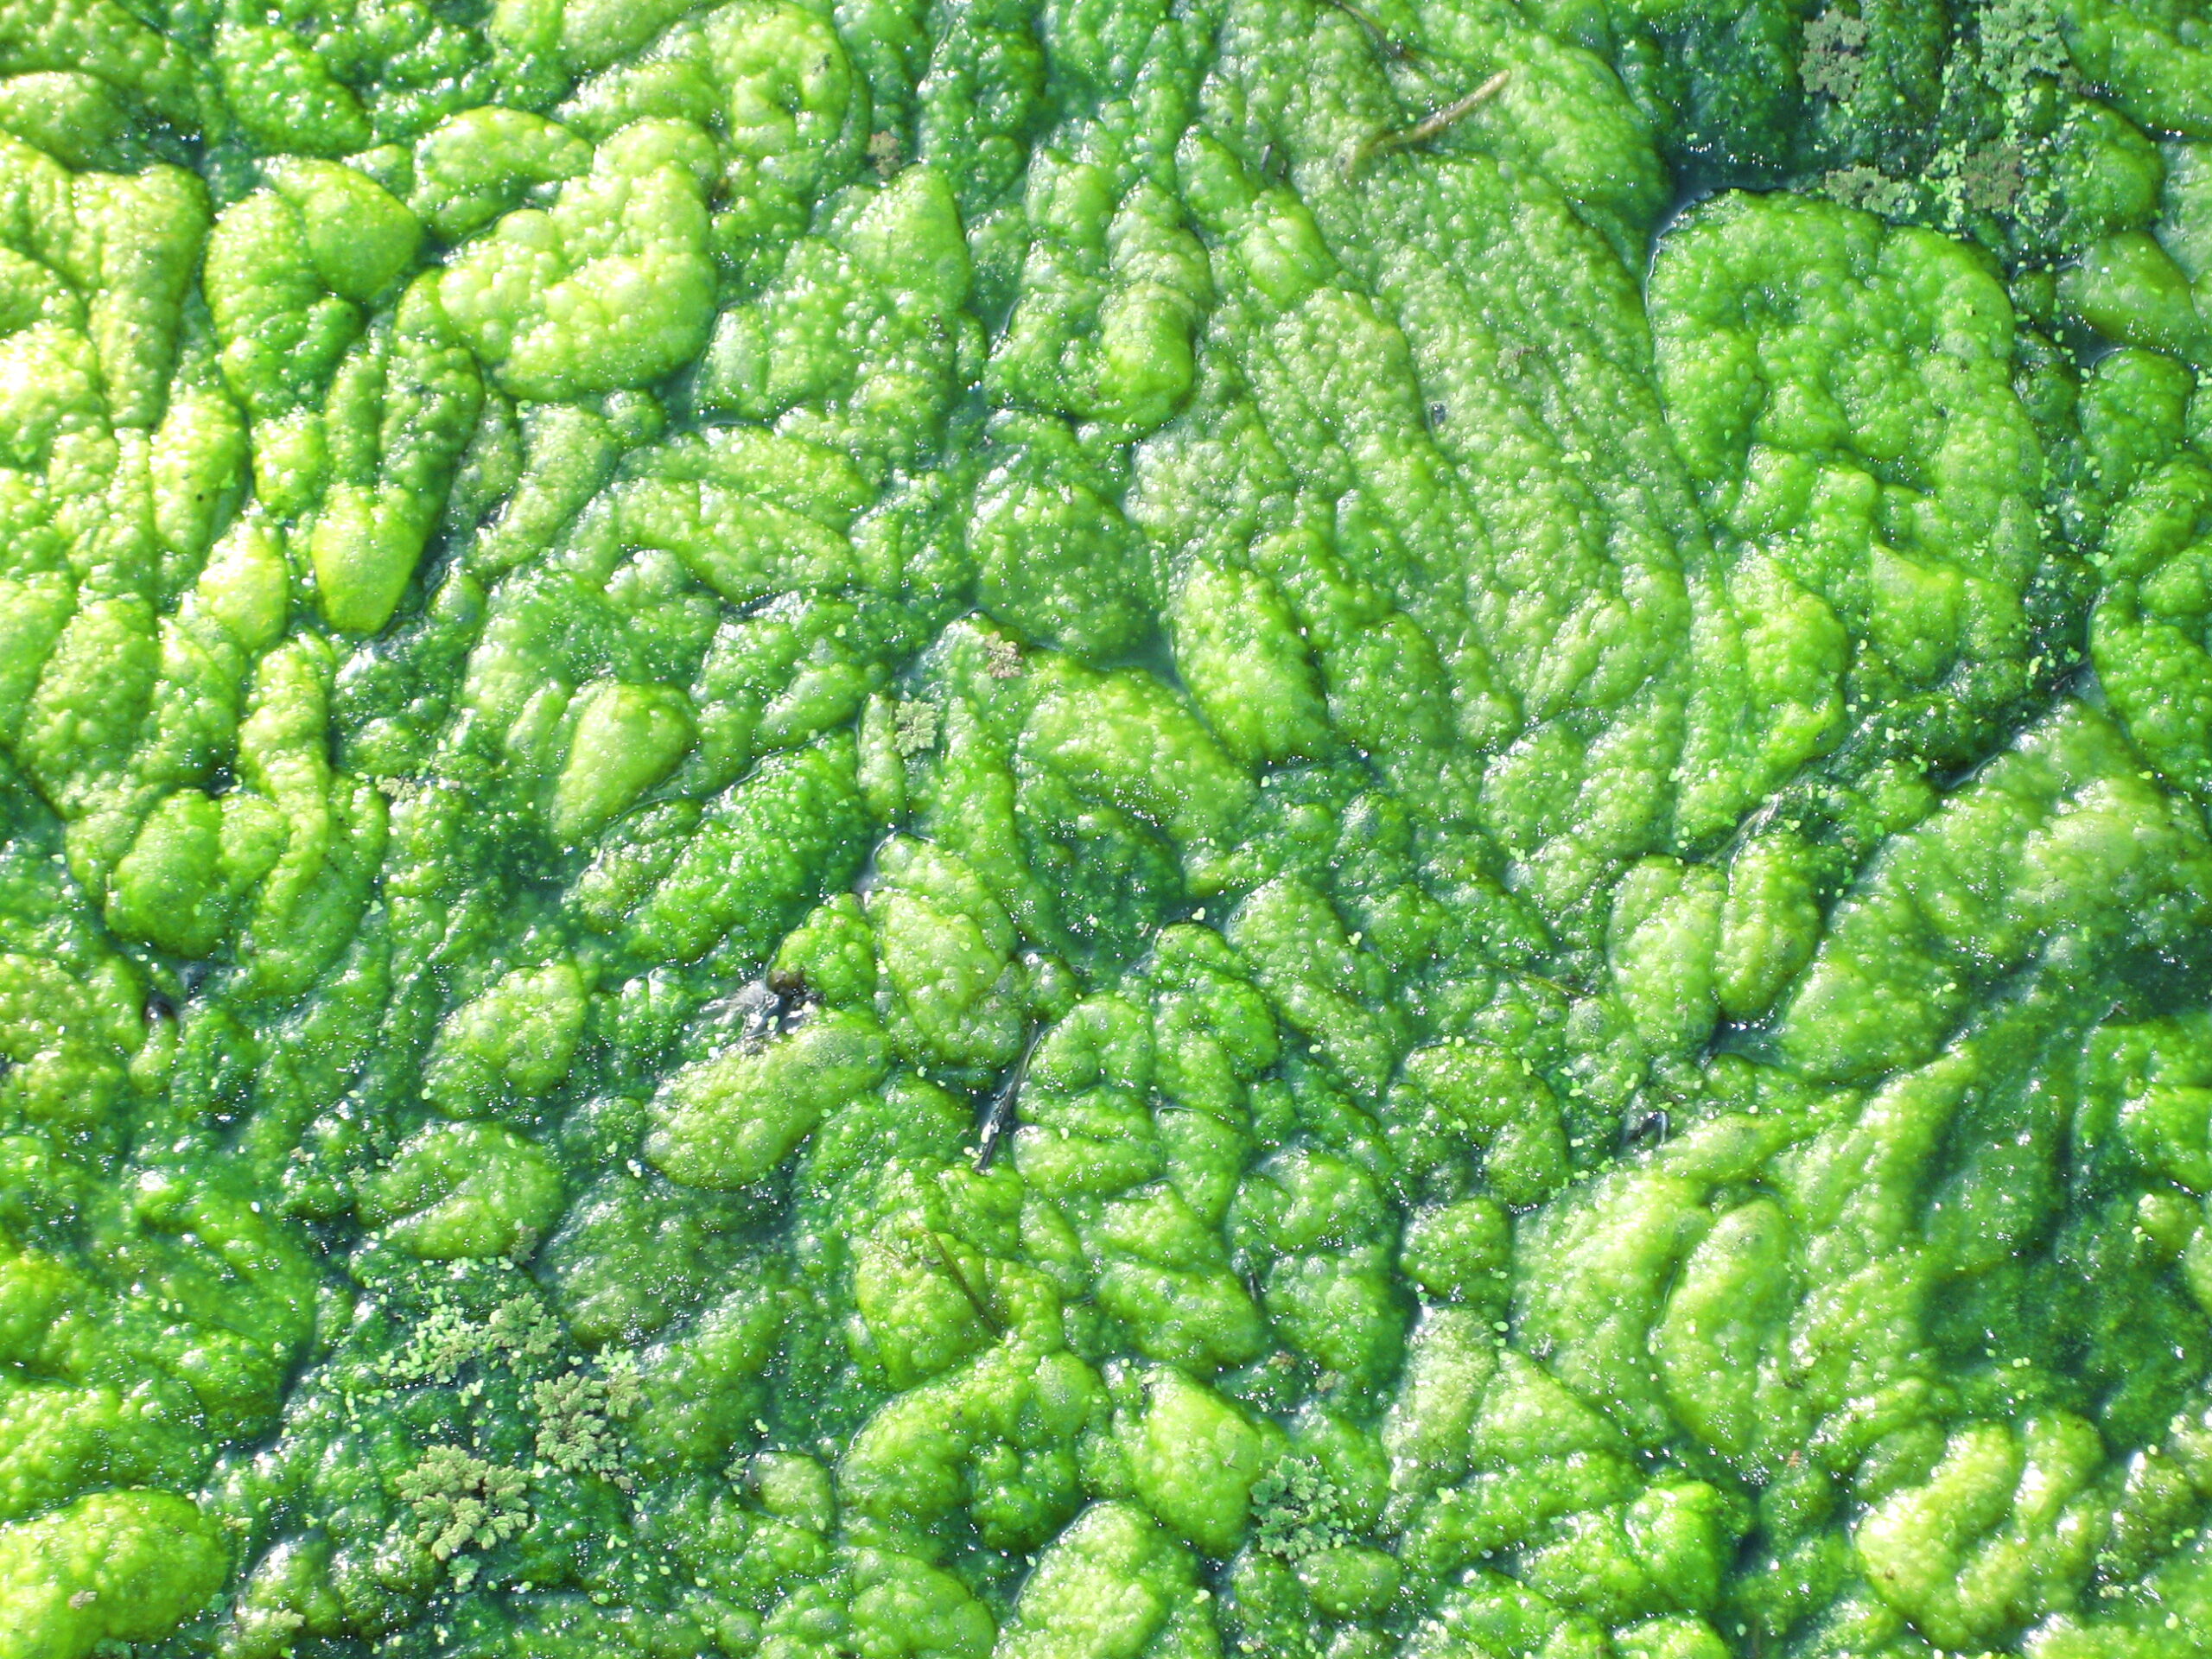 Harmful Blooms Of Algae Could Be Turned Into Biofuel